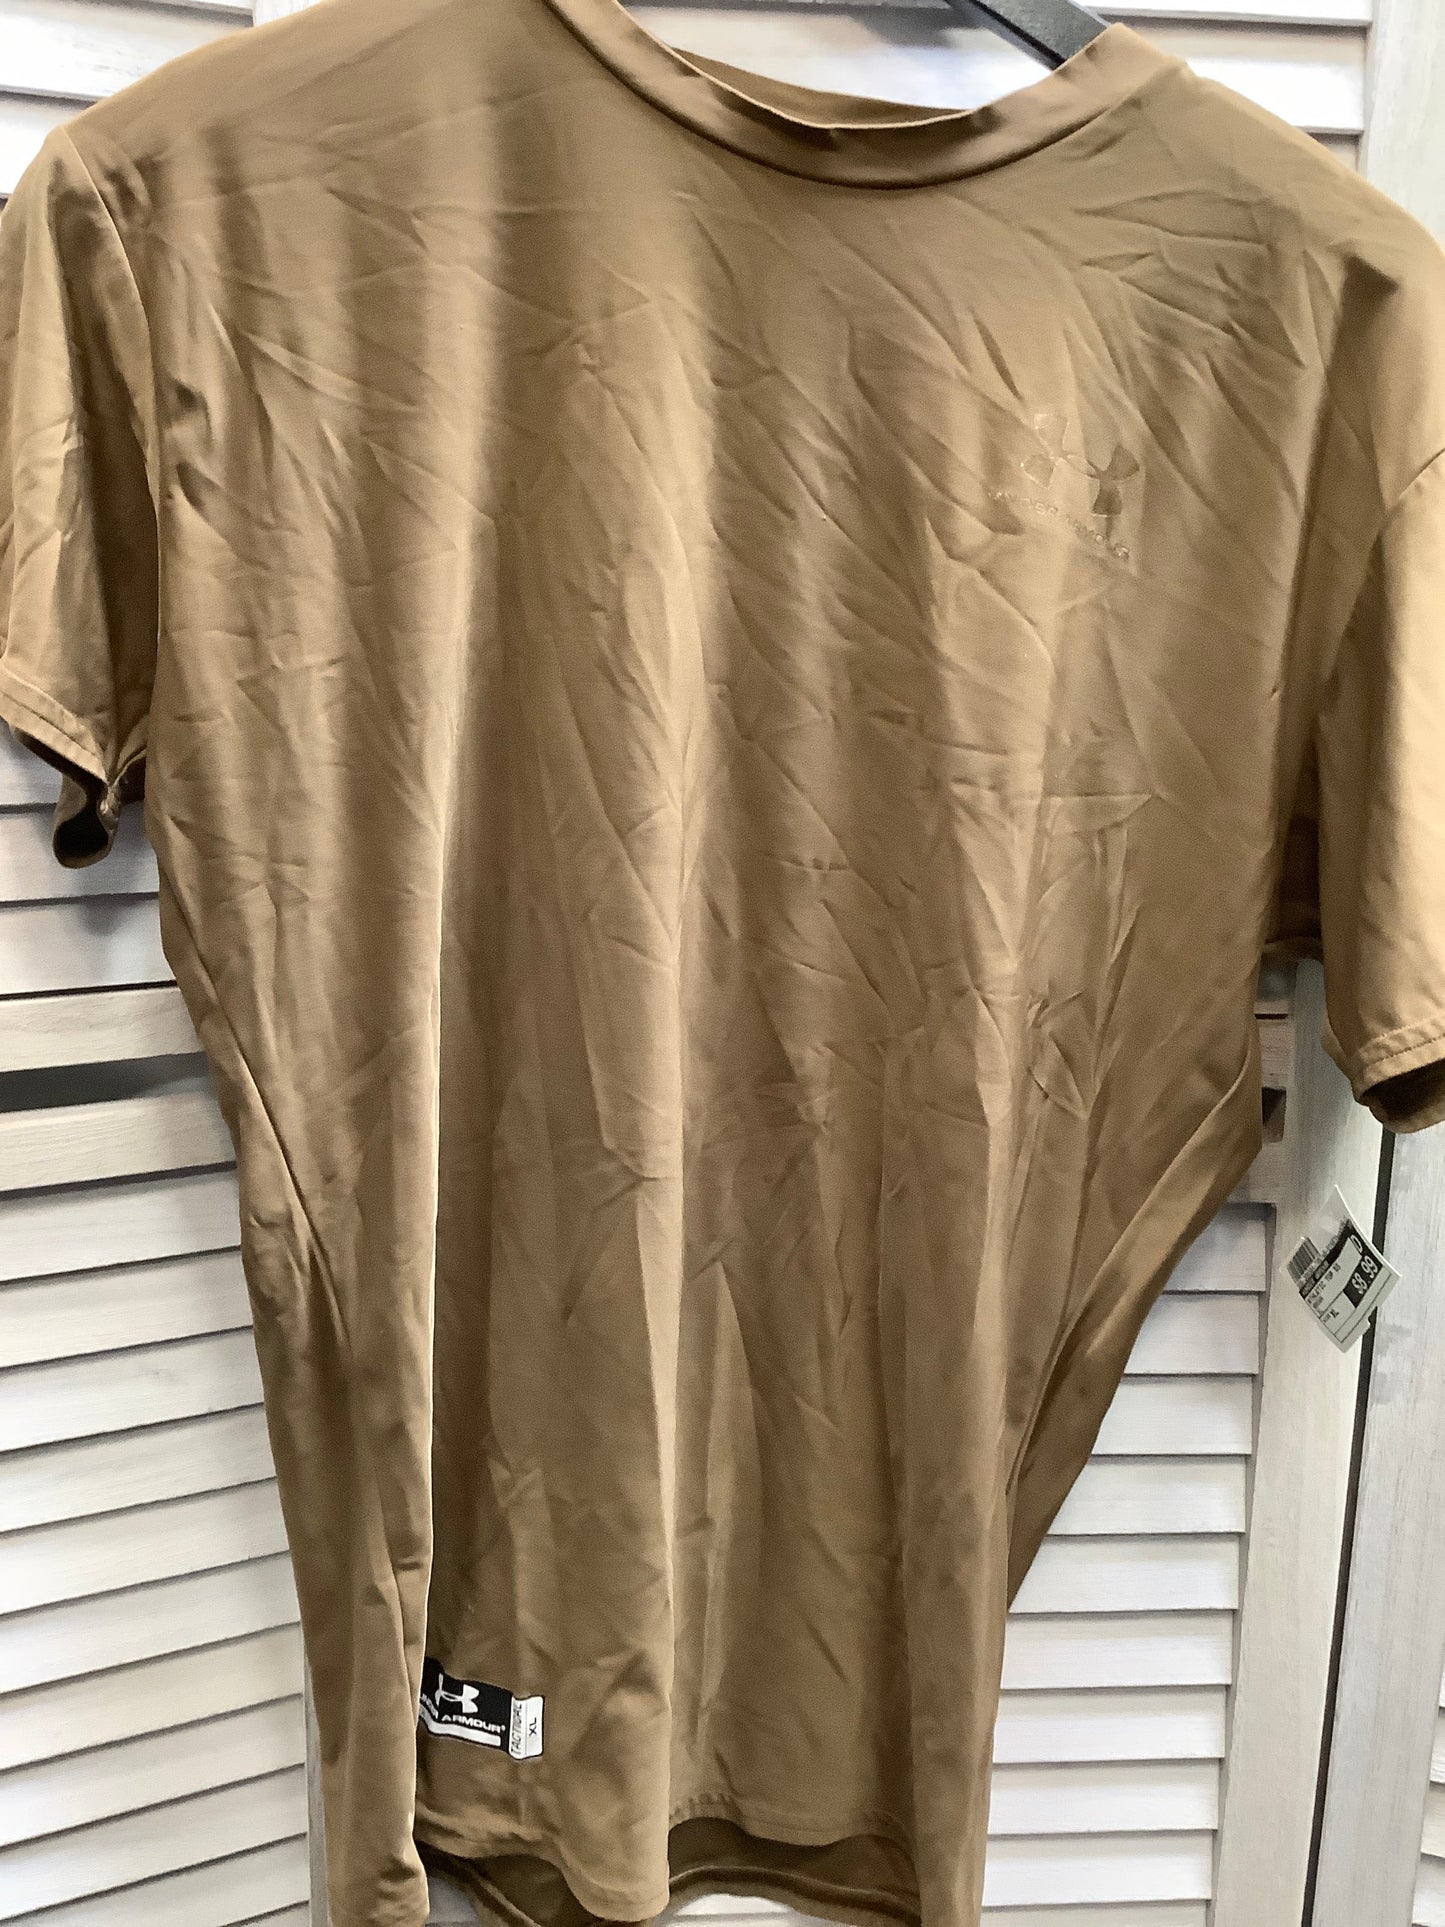 Brown Athletic Top Short Sleeve Under Armour, Size Xl